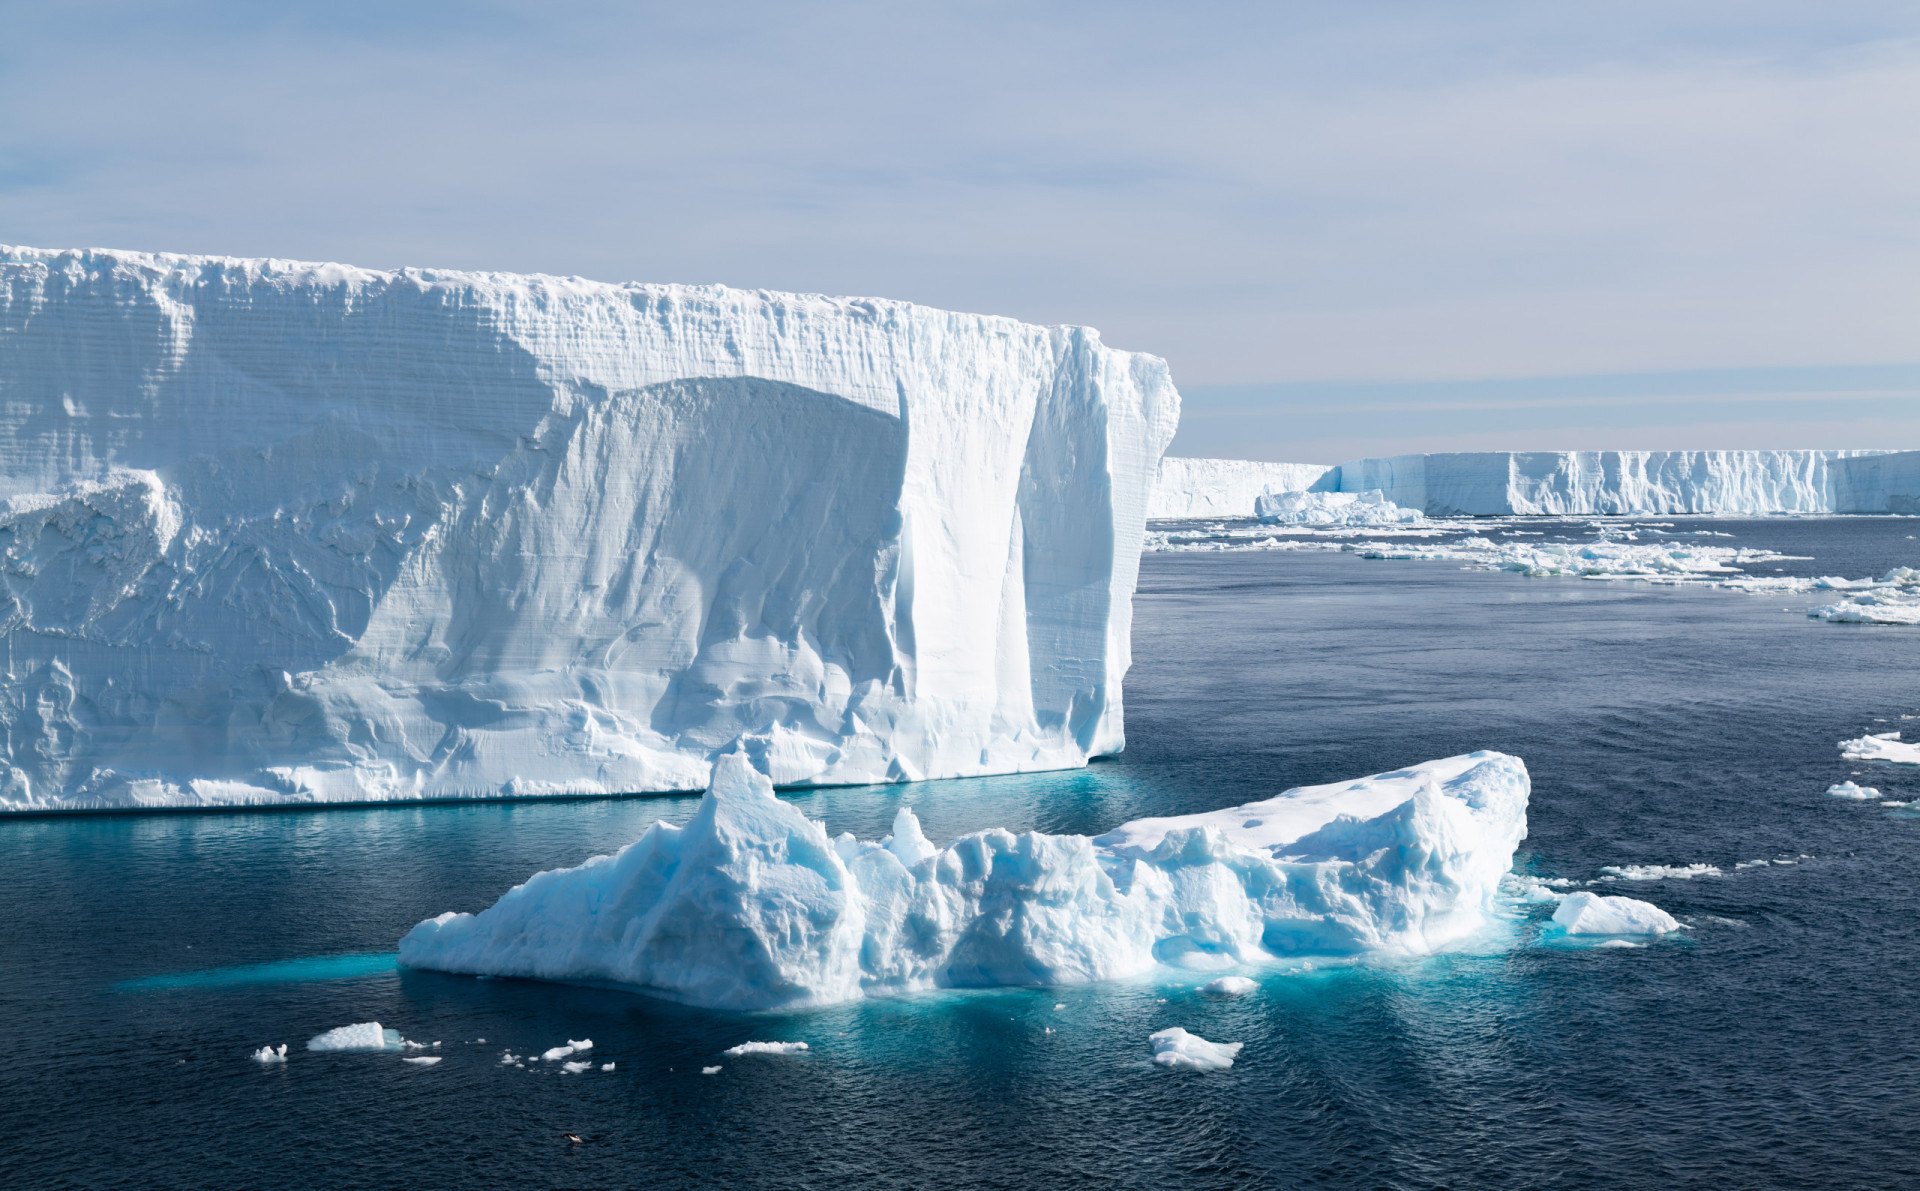 Could global warming be reversed by refreezing the polar regions?